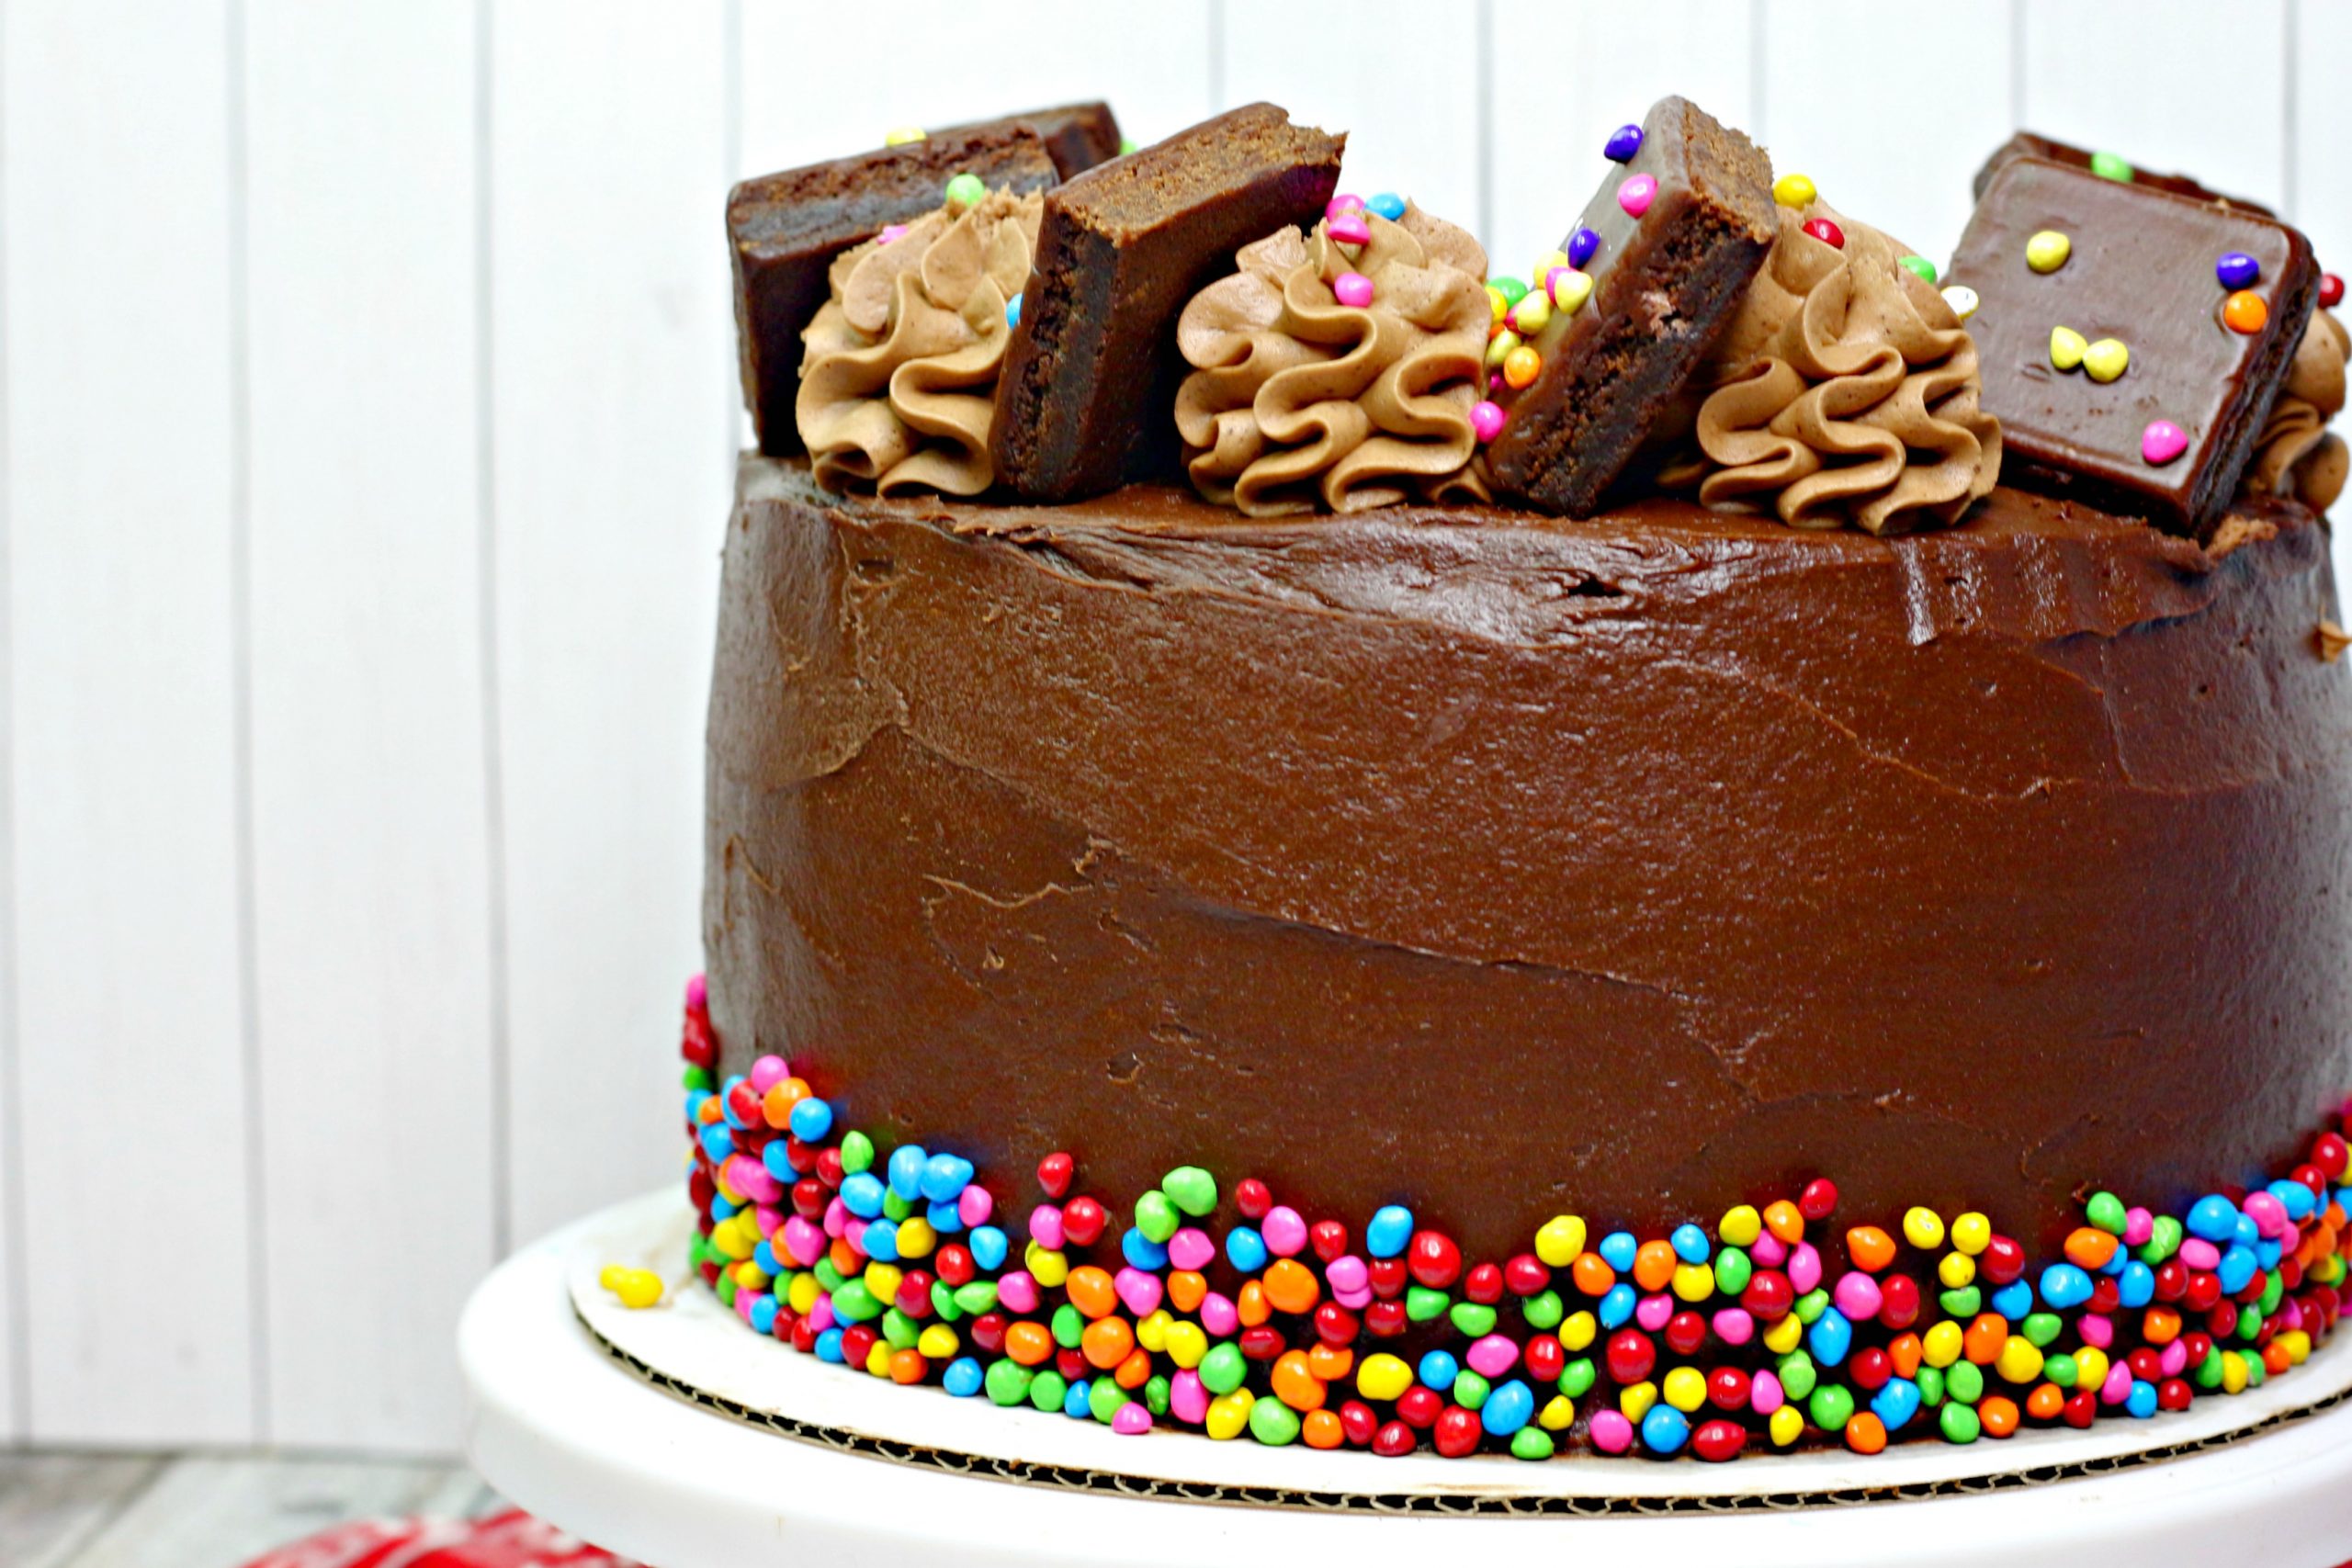 Cosmic Brownie Cake topped with cosmic brownies and more chocolate frosting.